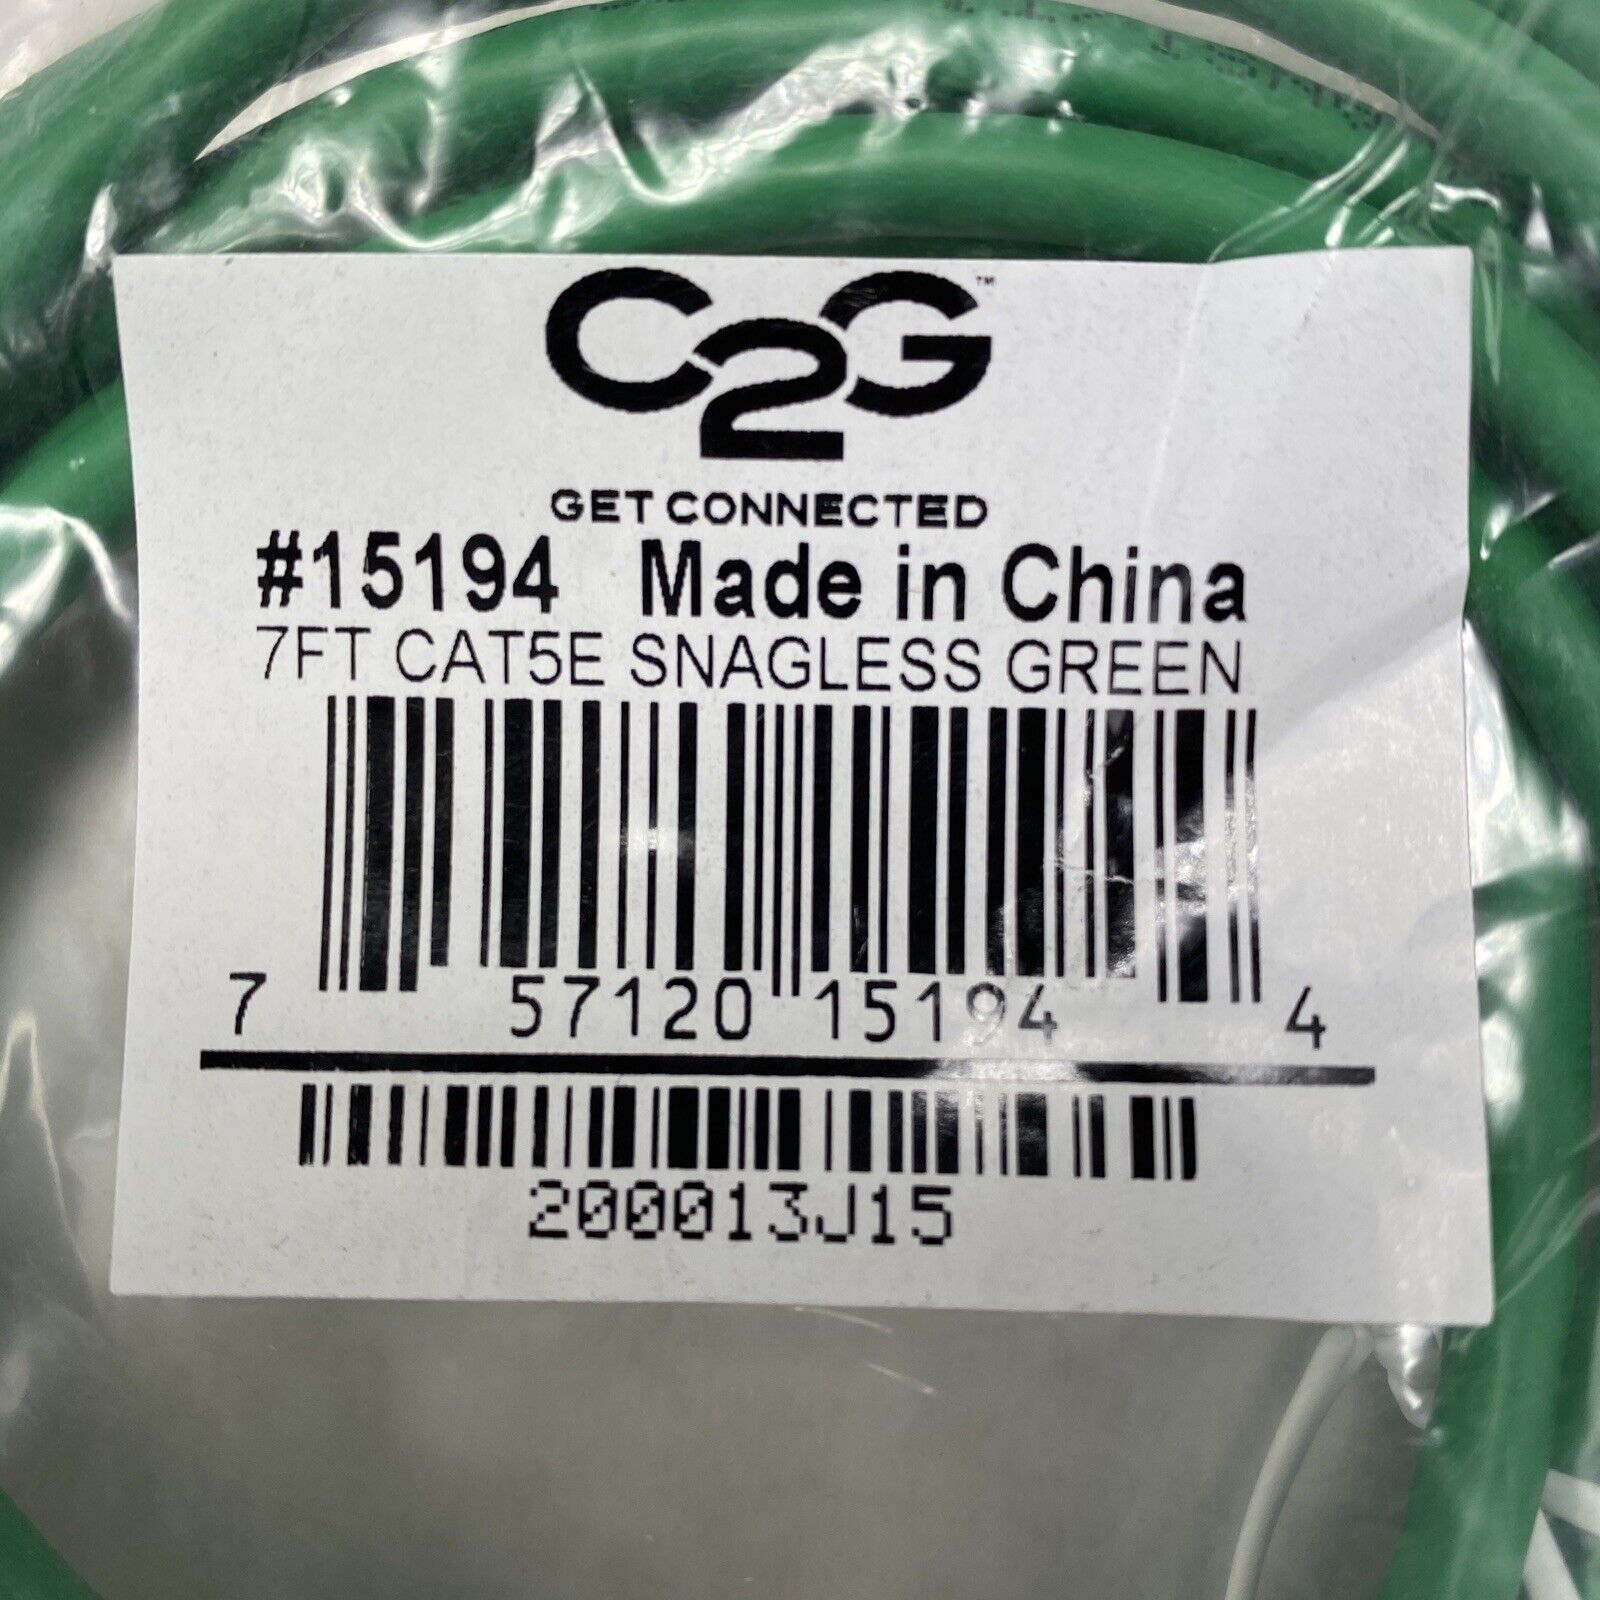 7ft Green Cat5e C2G 15194 Snagless Unshielded UTP Ethernet Patch Cable